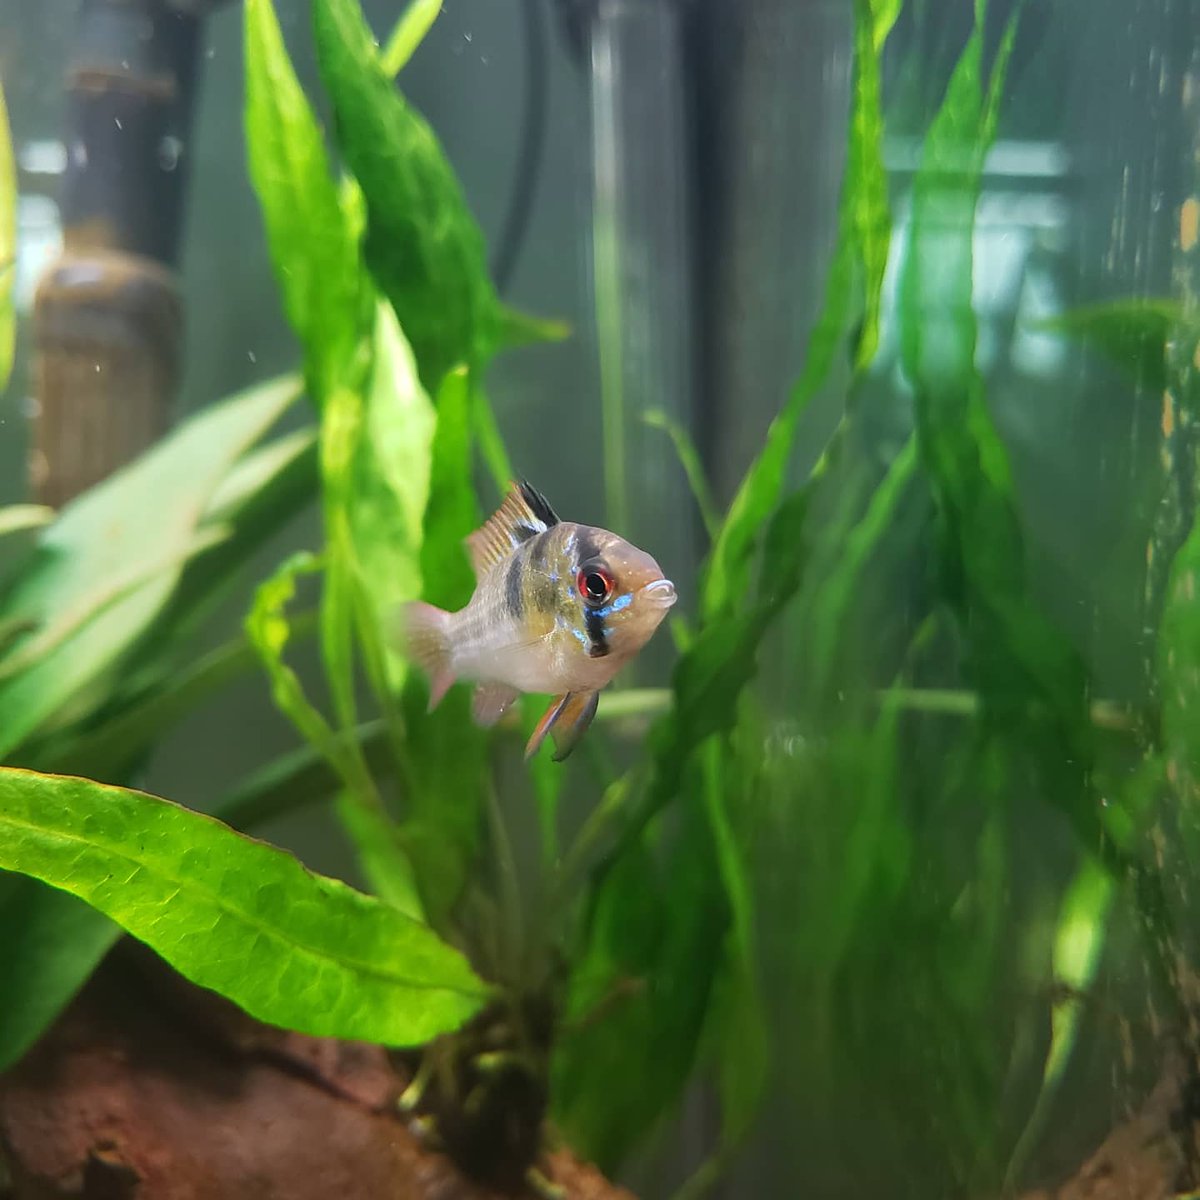 This is a German Blue Ram, native to the Orinoco River of Venezuela/Colombia. Unlike many other fish, they like to form monogamous pairs and take care of their babies (fry). A typical clutch may have up to 300 eggs! #FishFactFriday